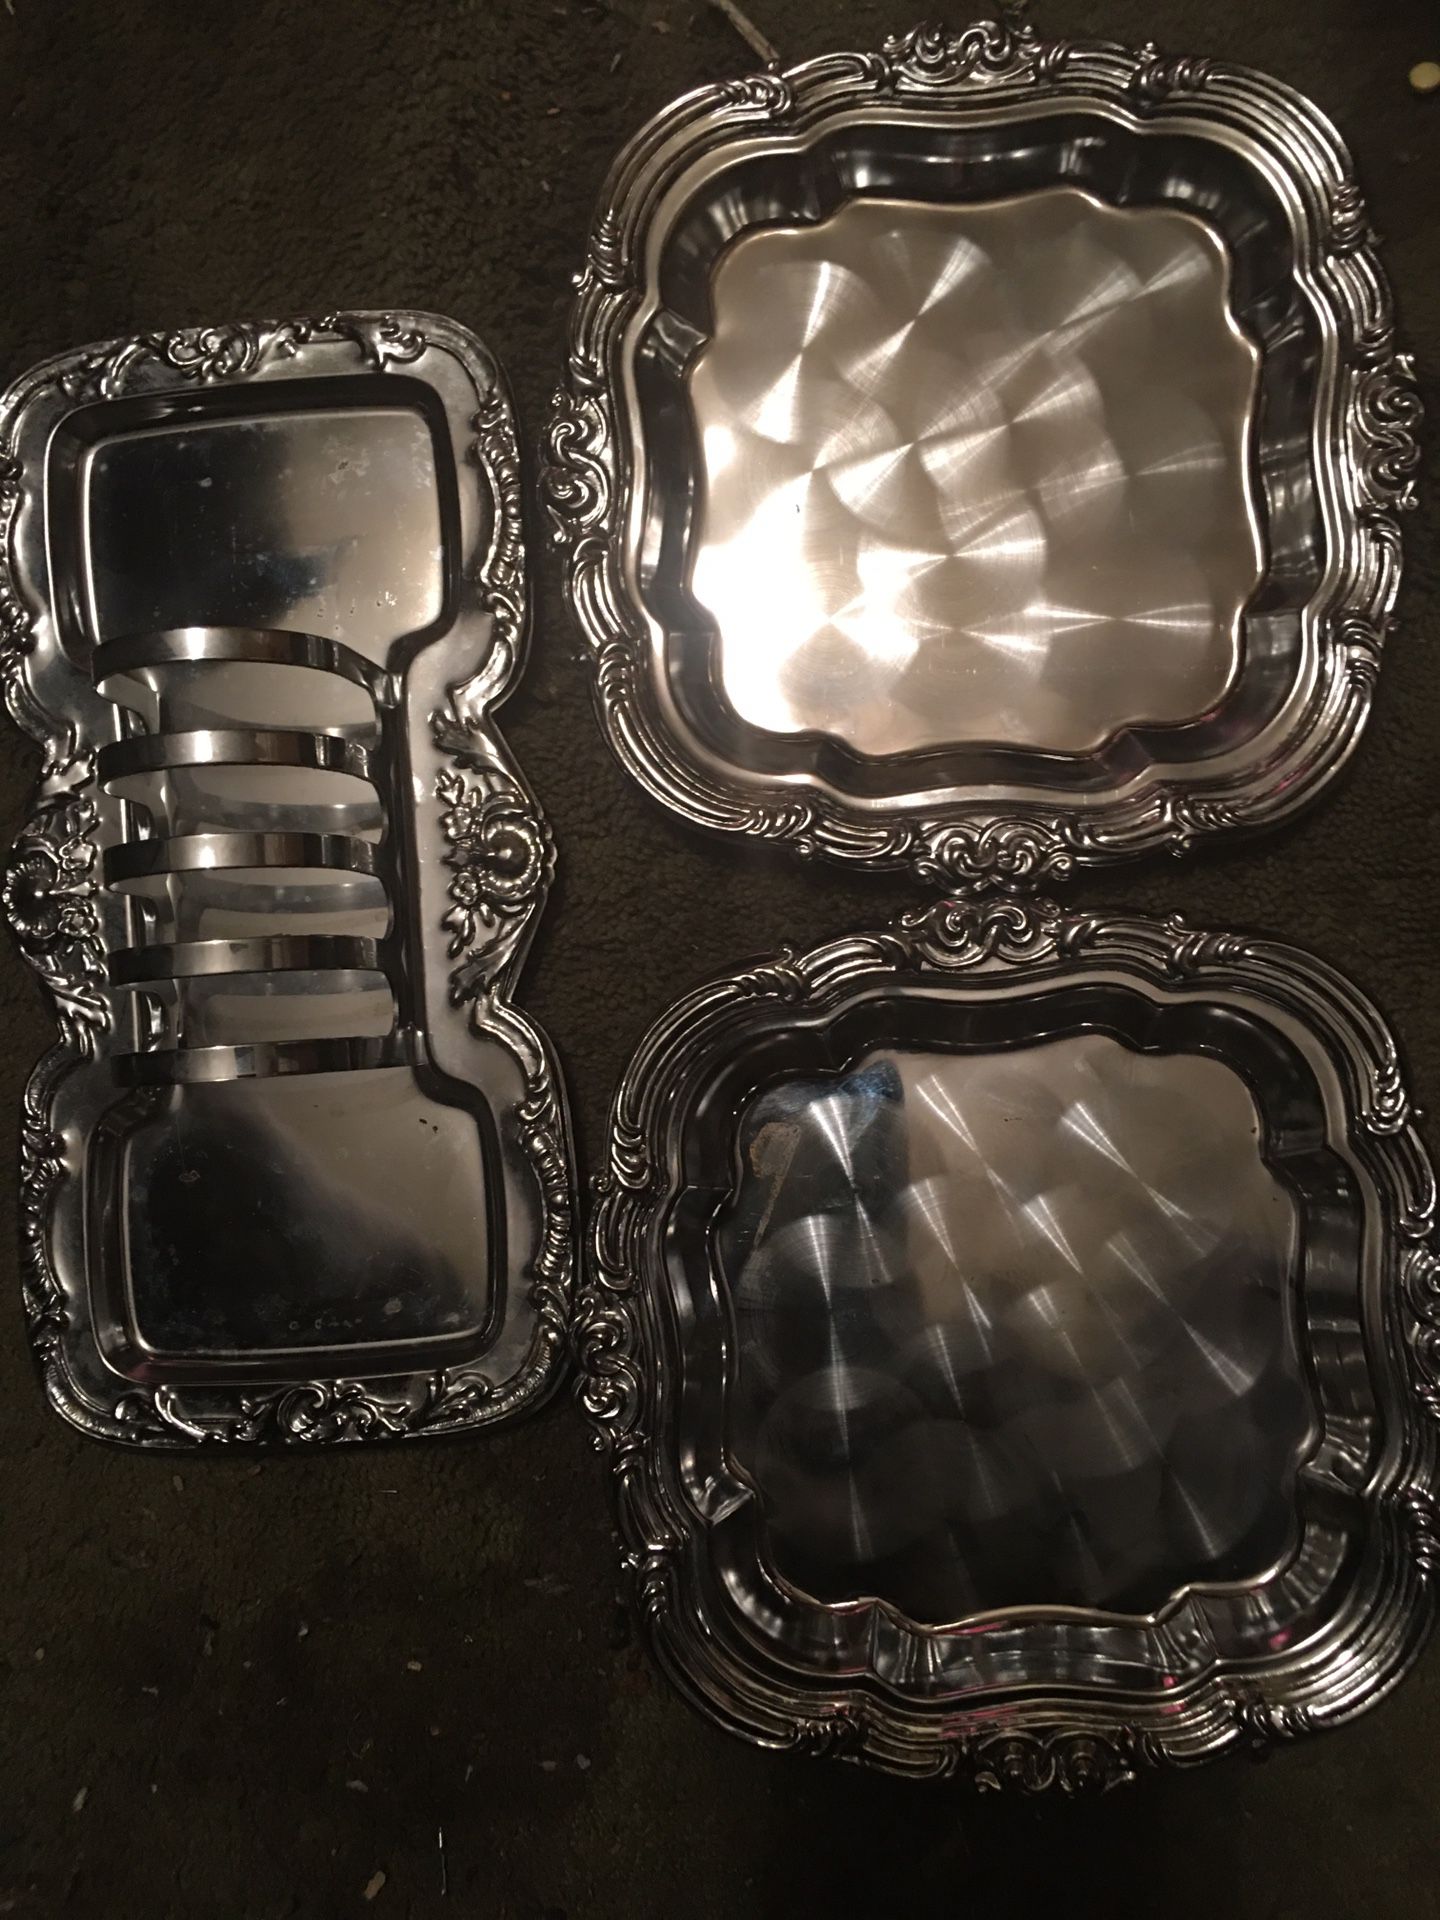 BRAND NEW SILVER PLATED BREAD DISH AND PLATE HOLDER $20.00